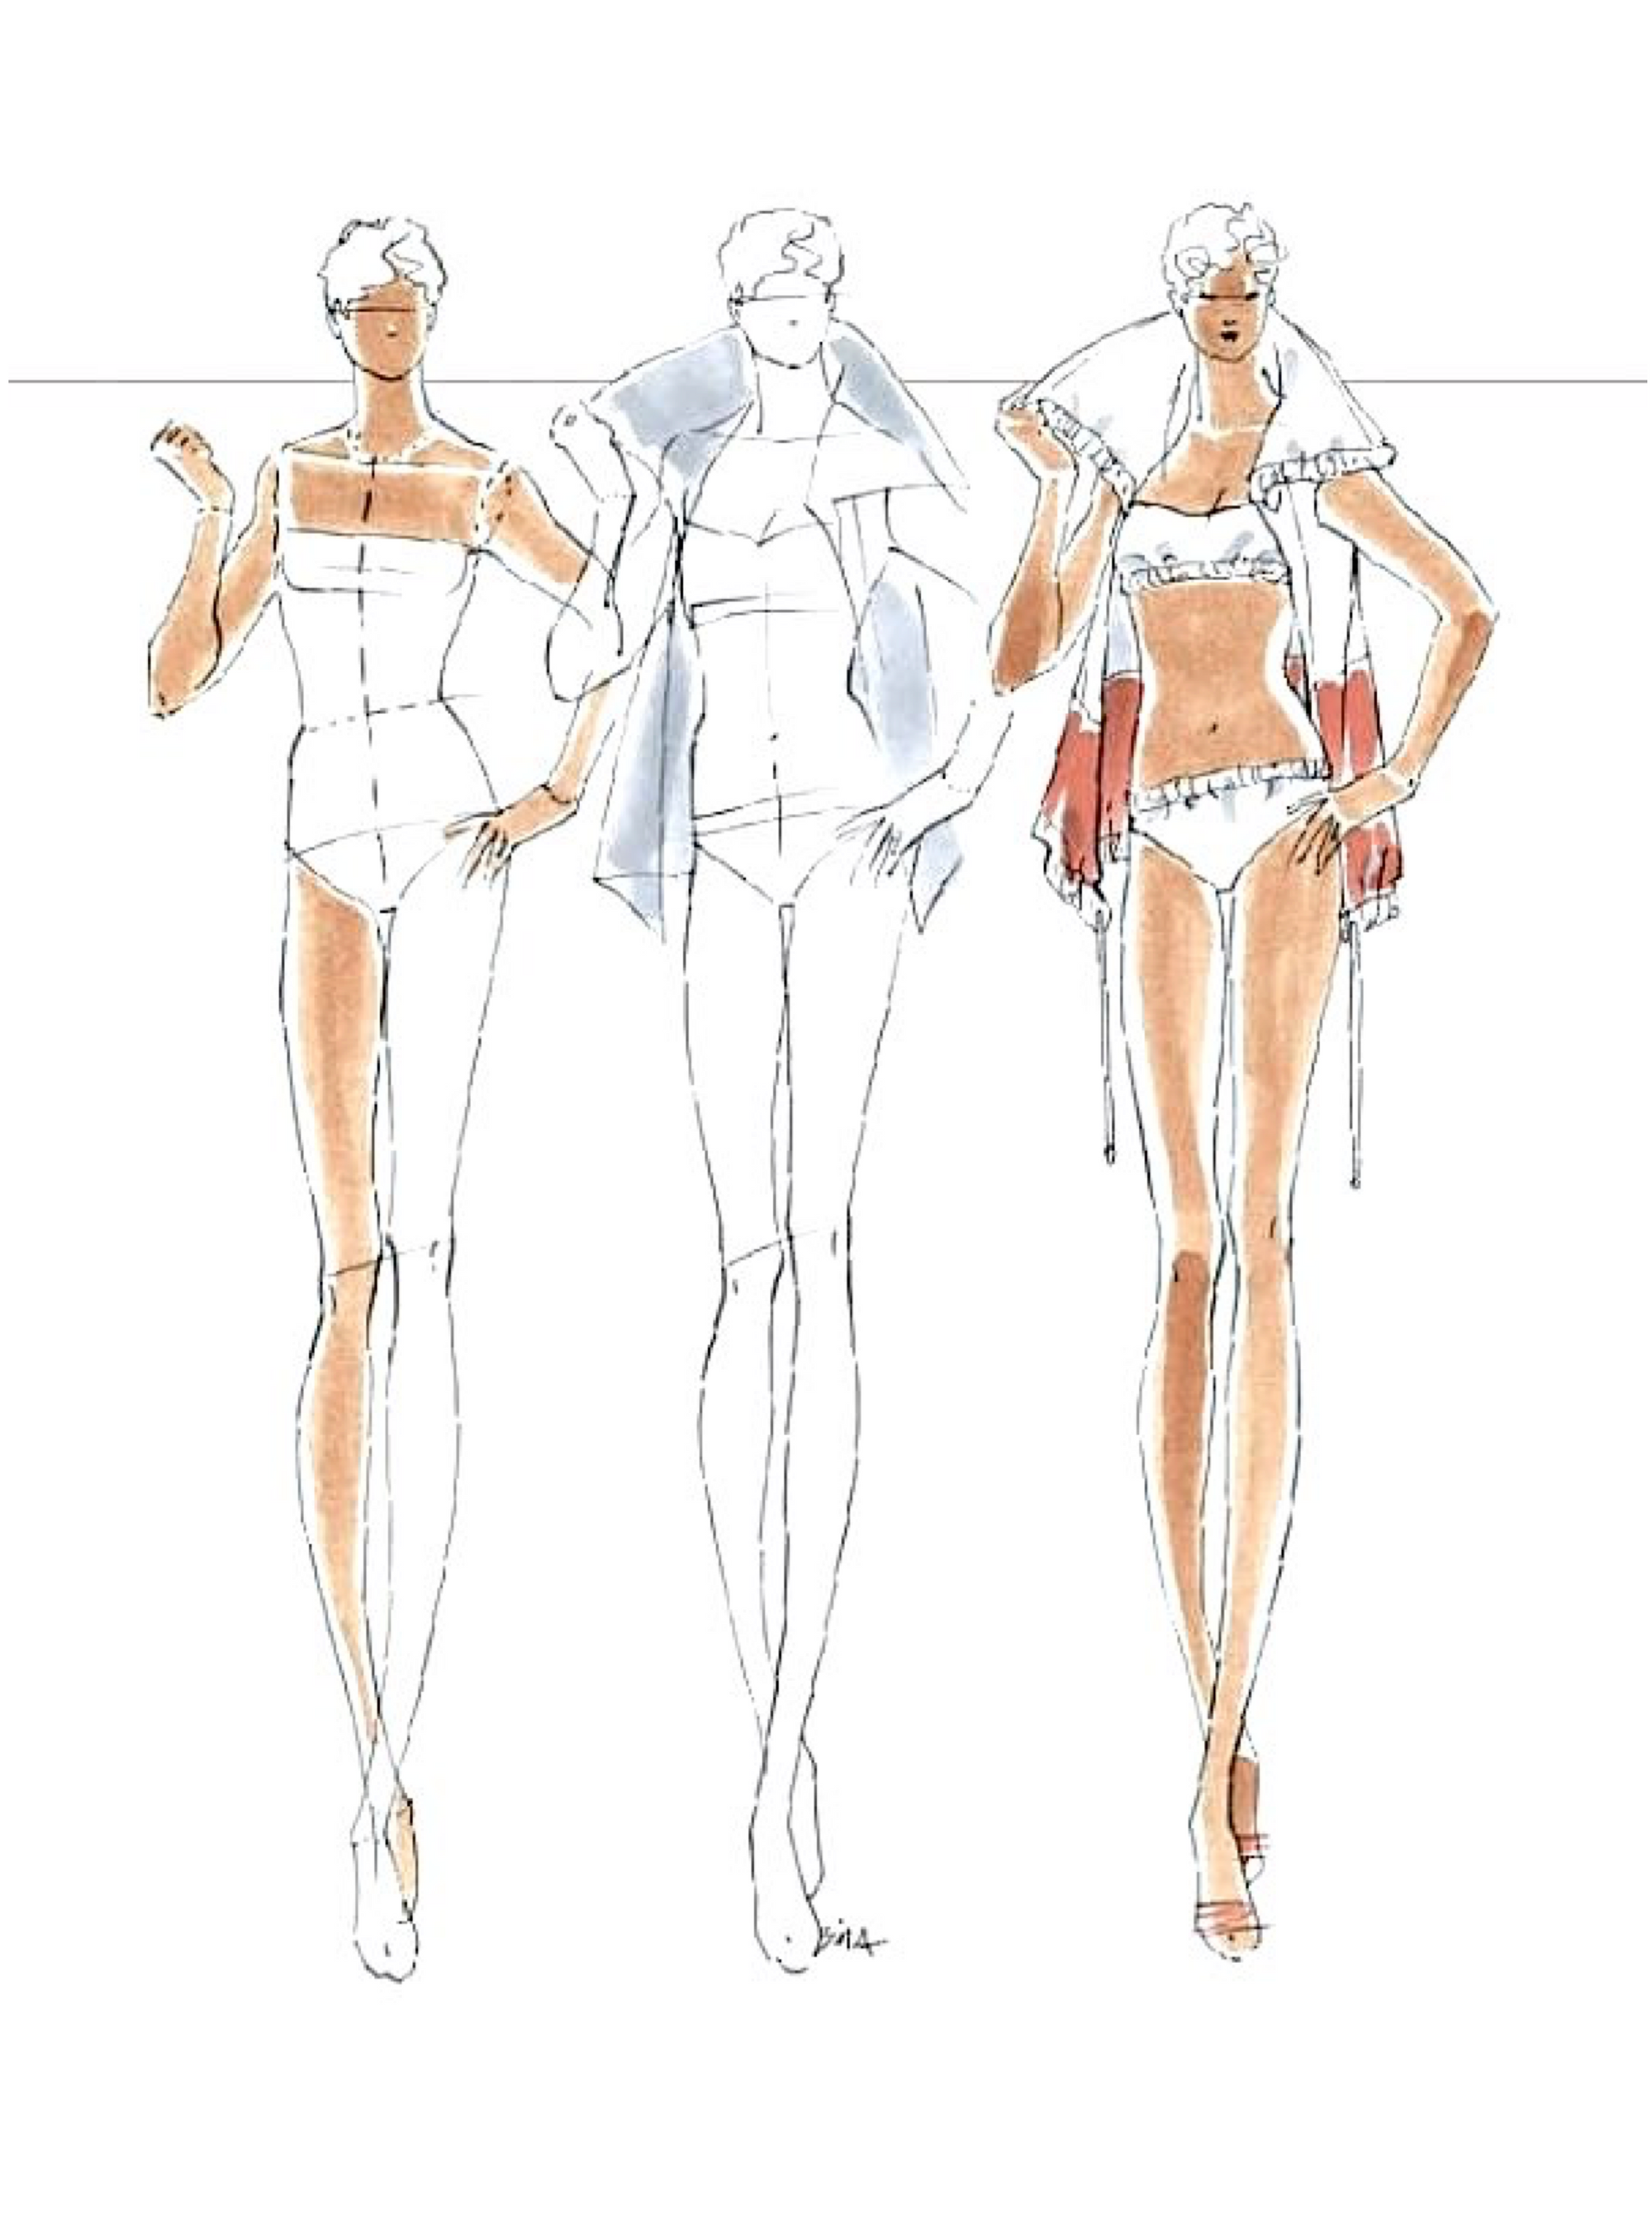 How to draw fashion poses - YouTube